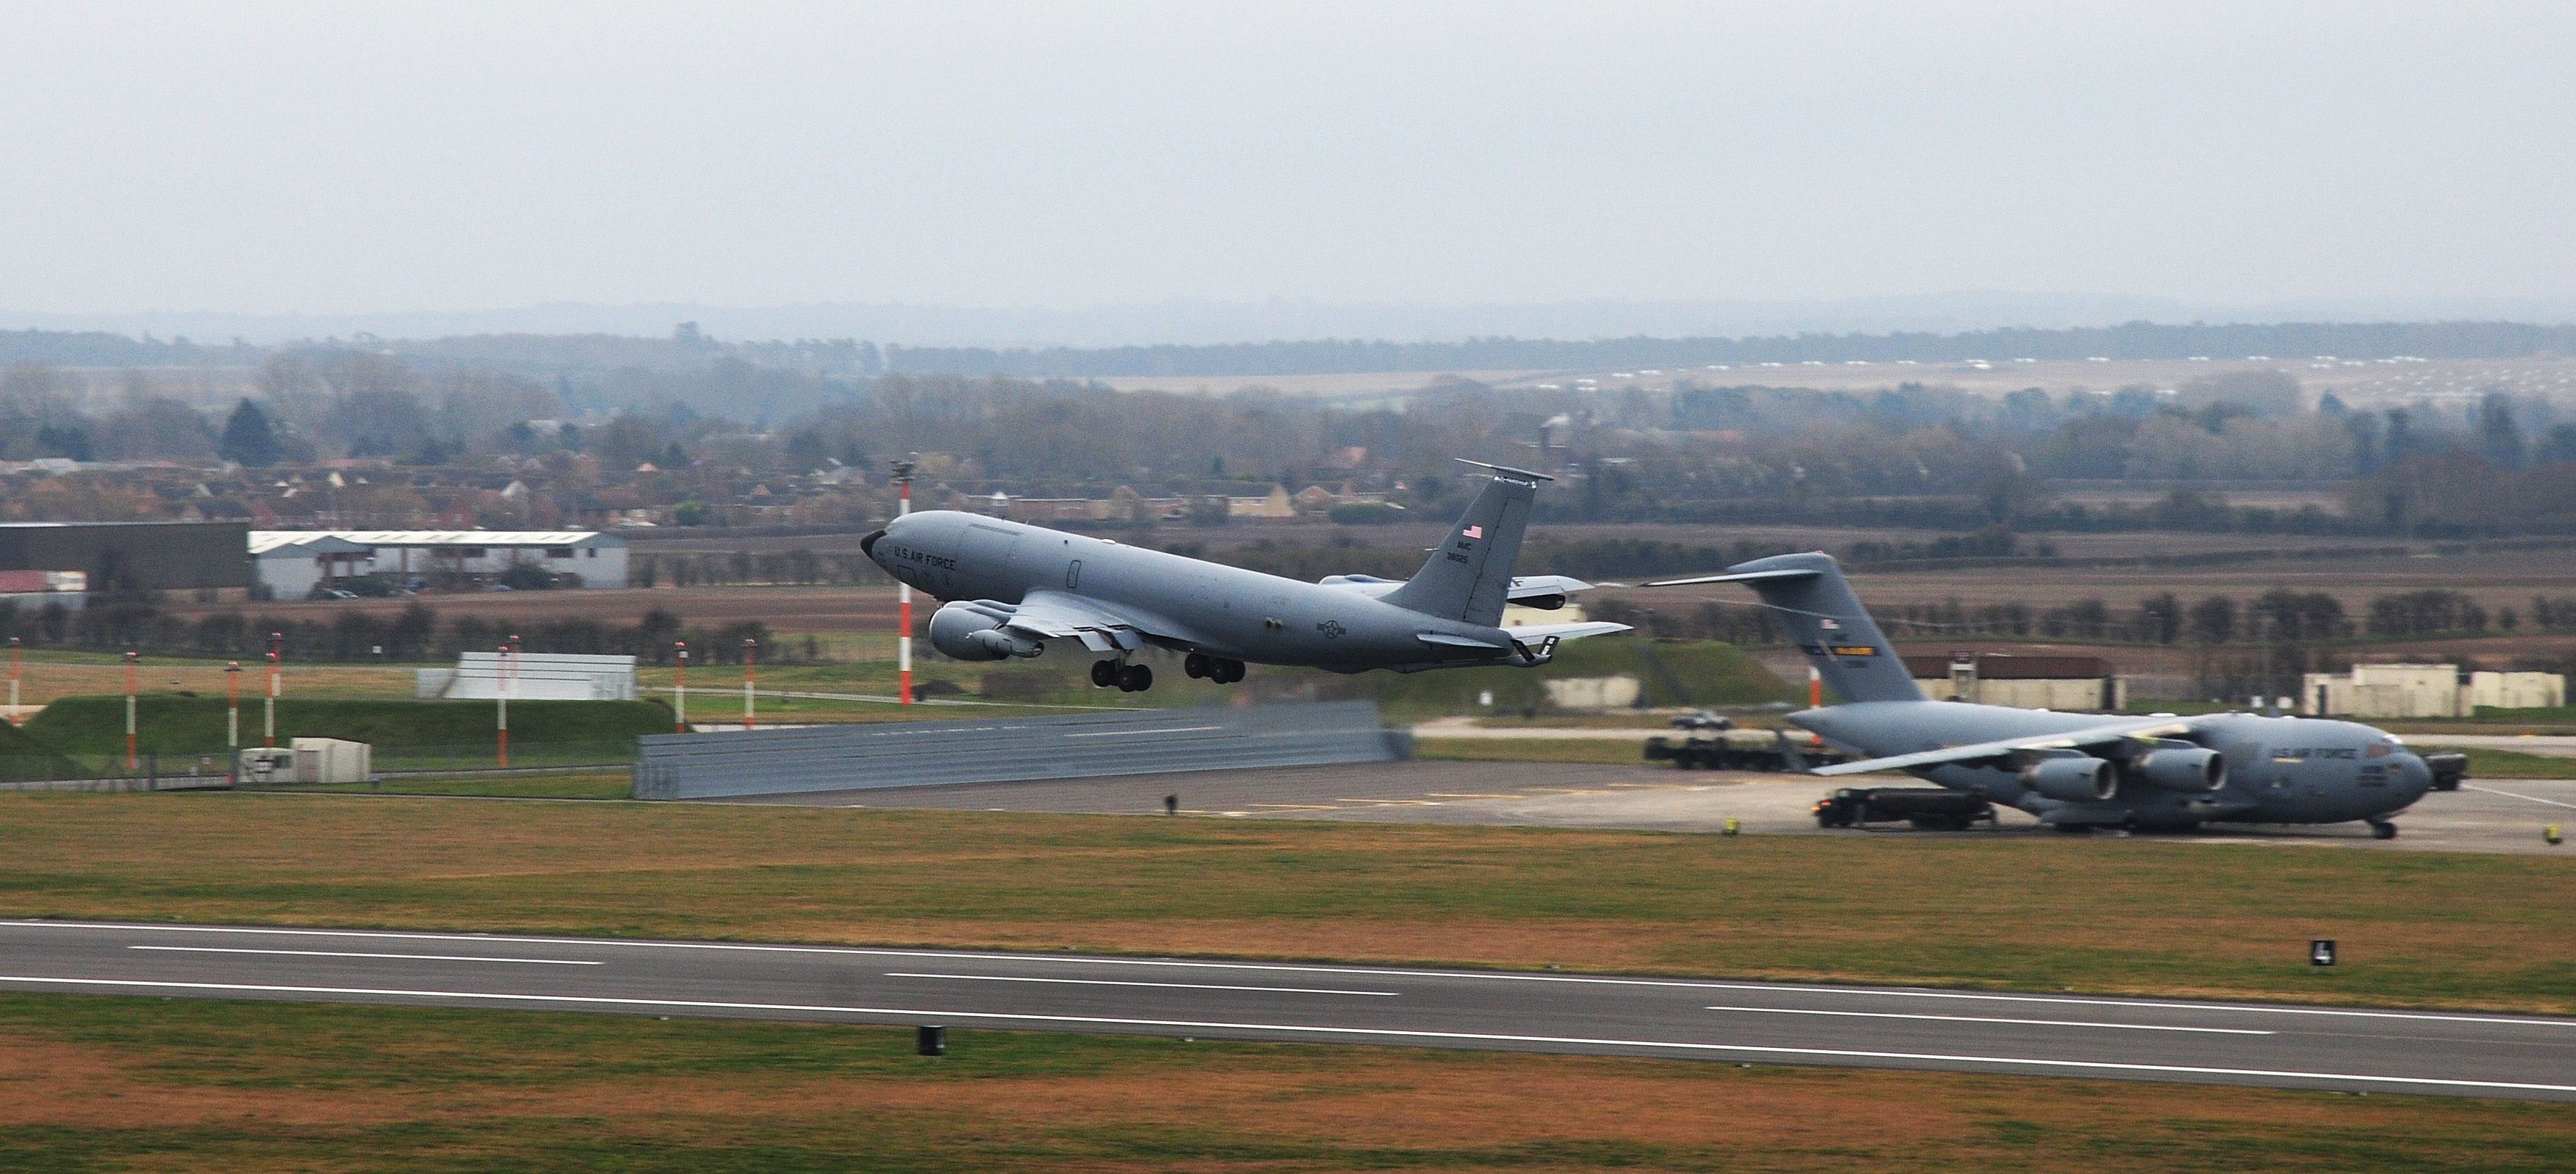 A KC-135 taking off from RAF Mildenhall. (USAF photo)